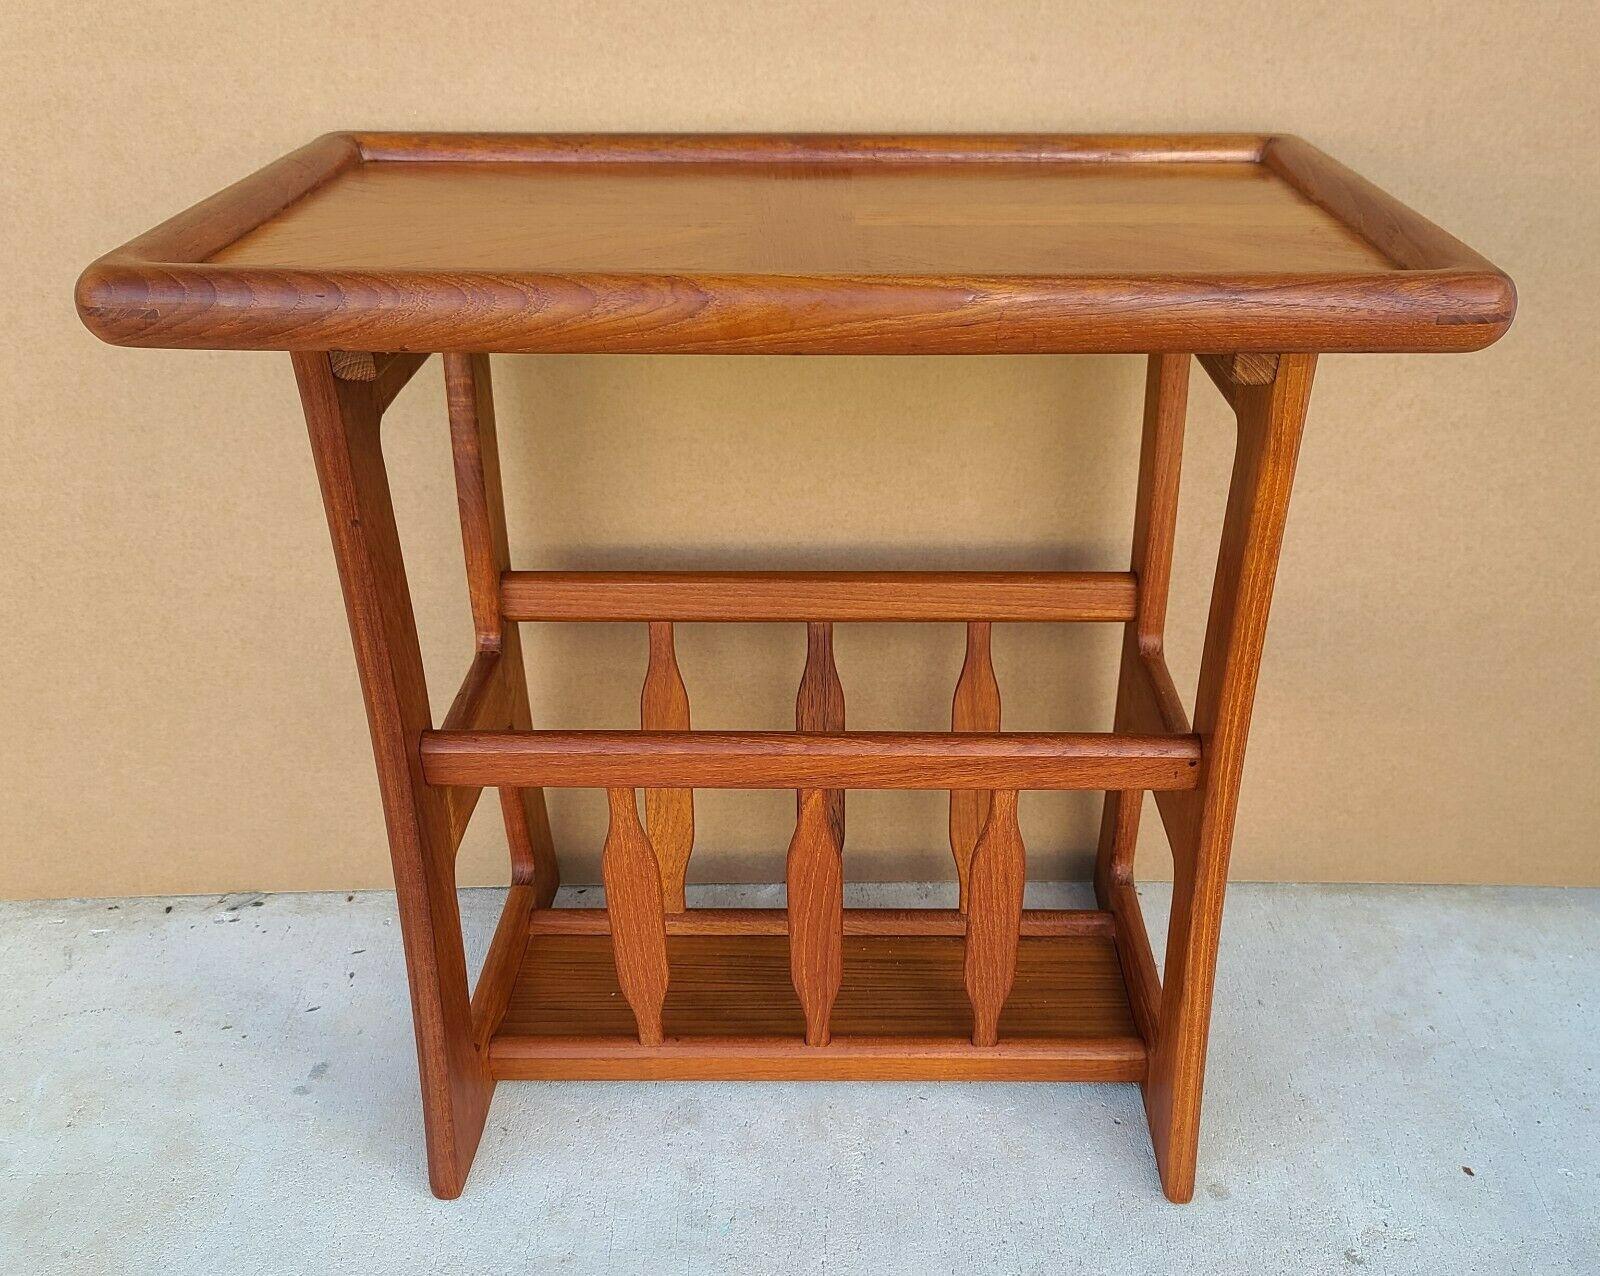 Offering One Of Our Recent Palm Beach Estate Fine Furniture Acquisitions Of A 
Vintage MCM Danish Modern Solid Teak Side End Table with Magazine Holder by GOODWOOD

Approximate Measurements in Inches
21.75